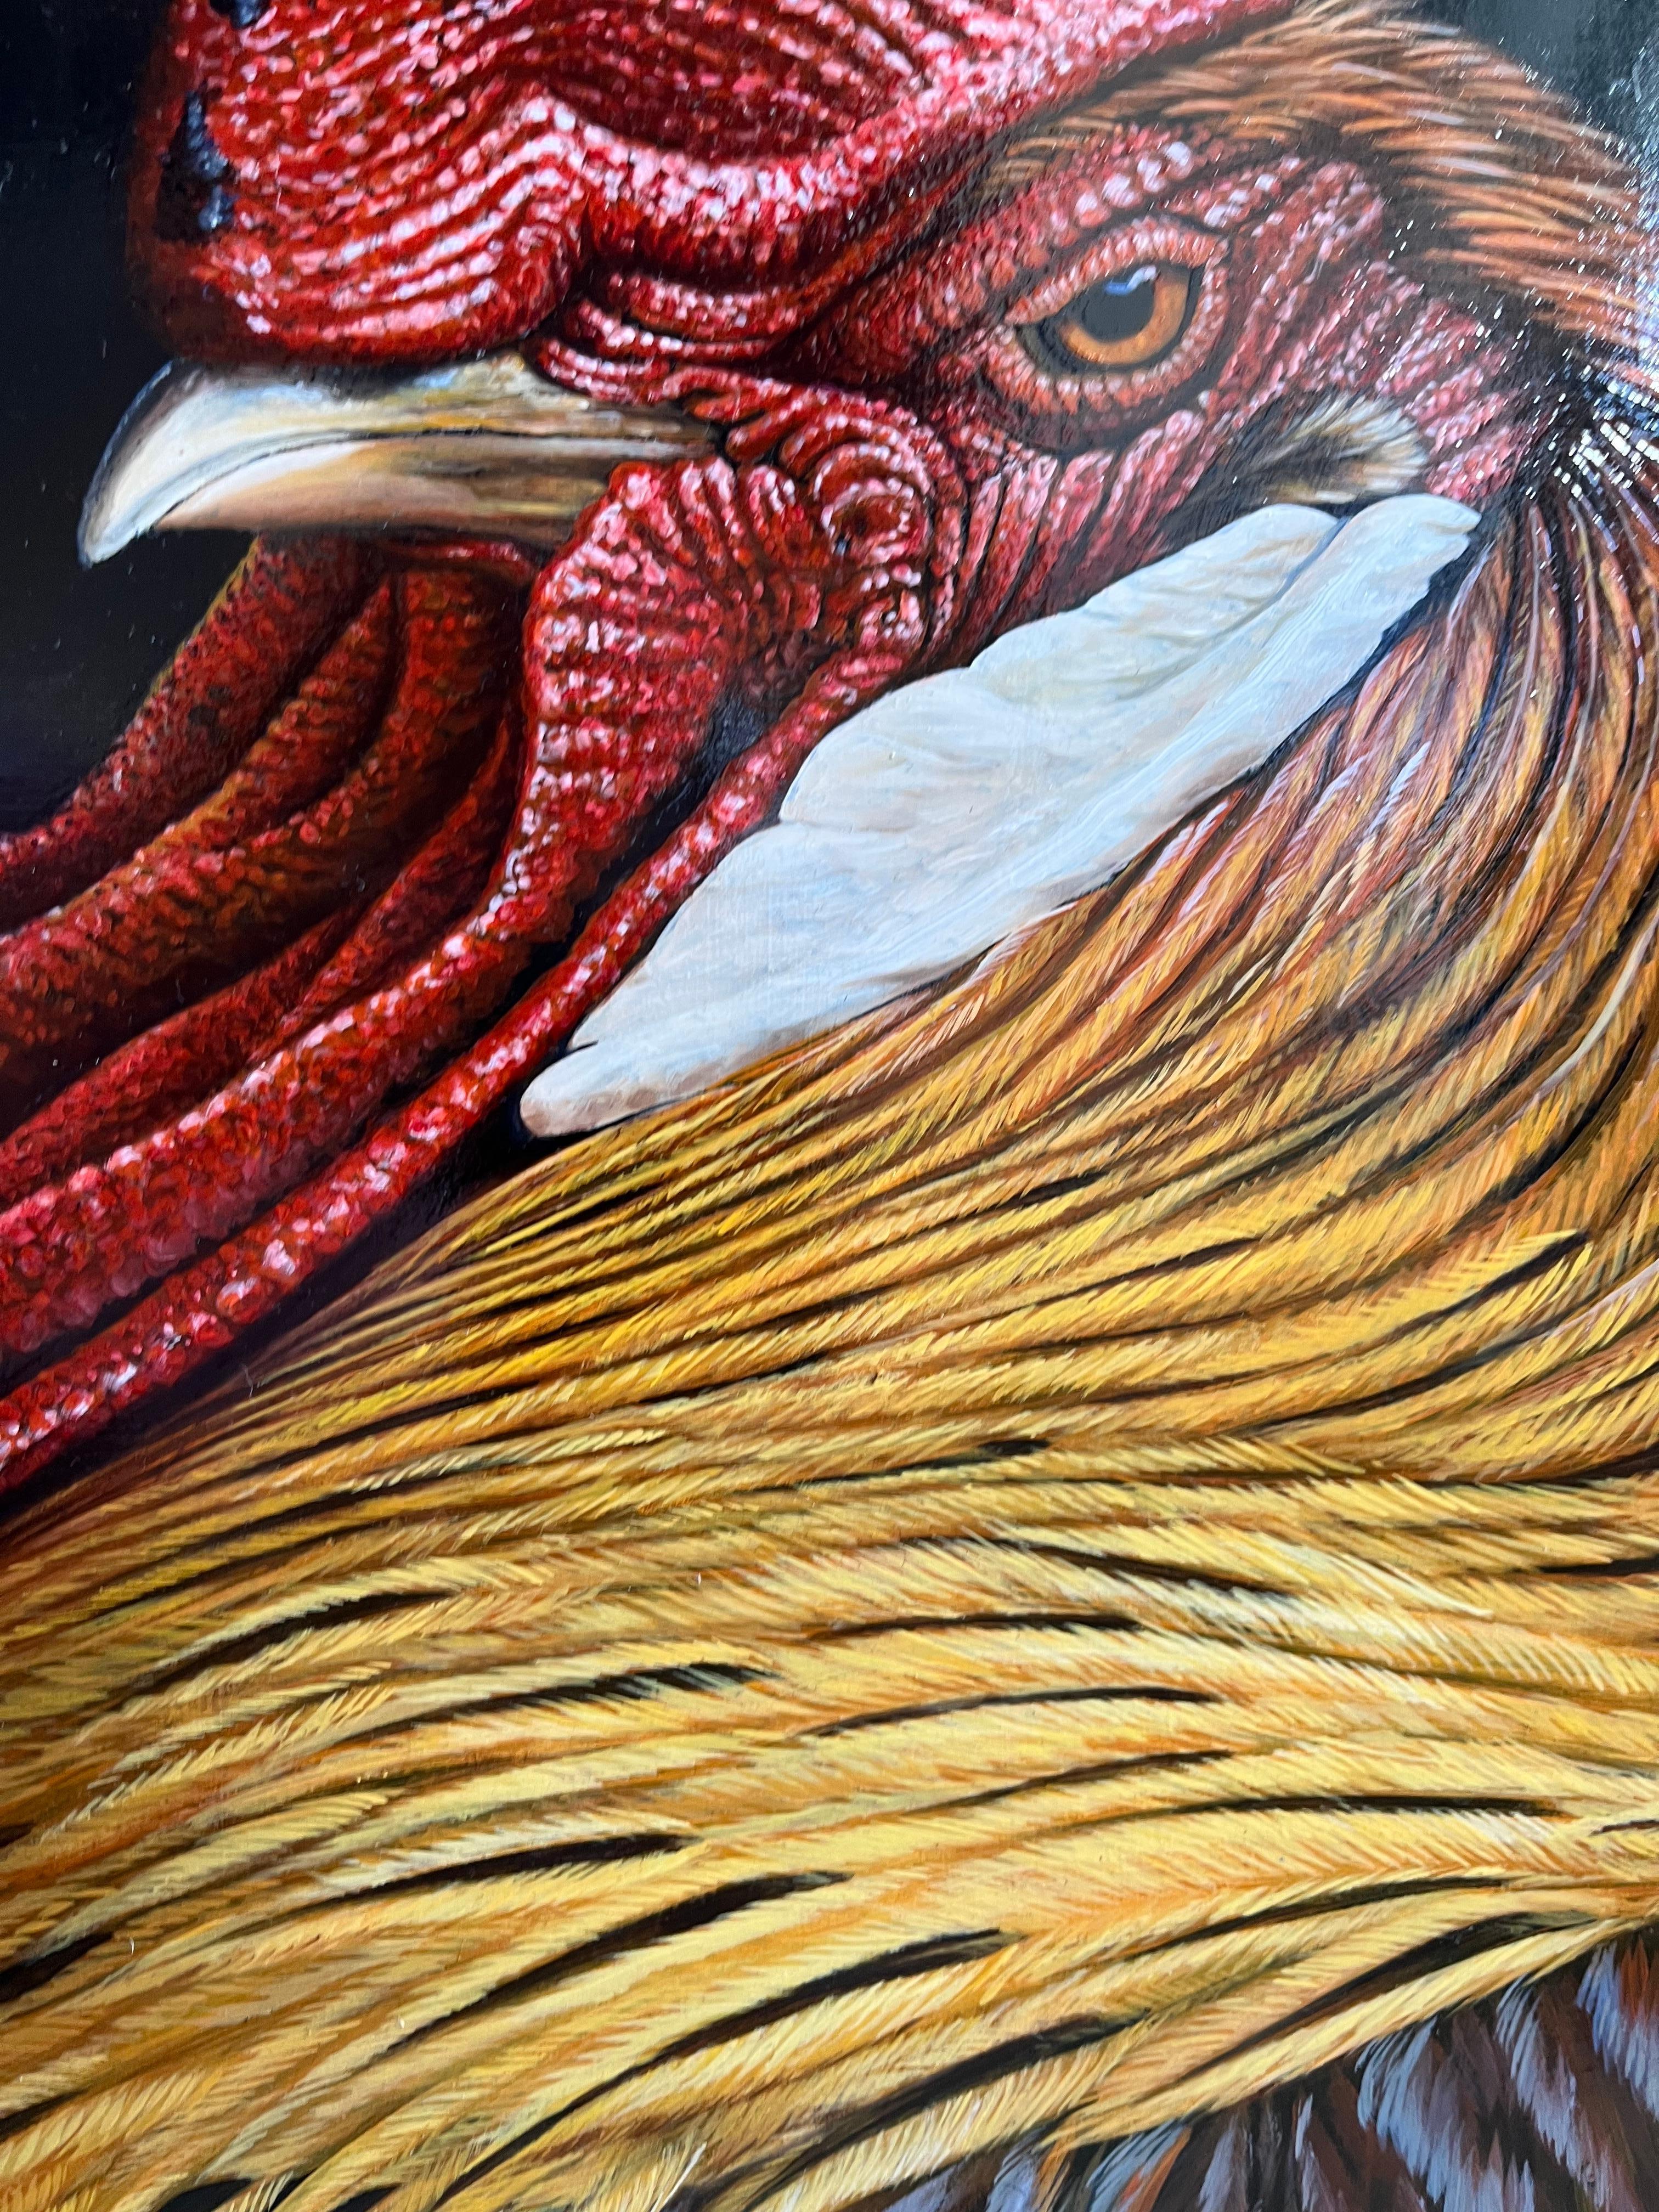 'Cockerel' Photorealist painting fo a colourful bird, red, orange, green, black For Sale 2